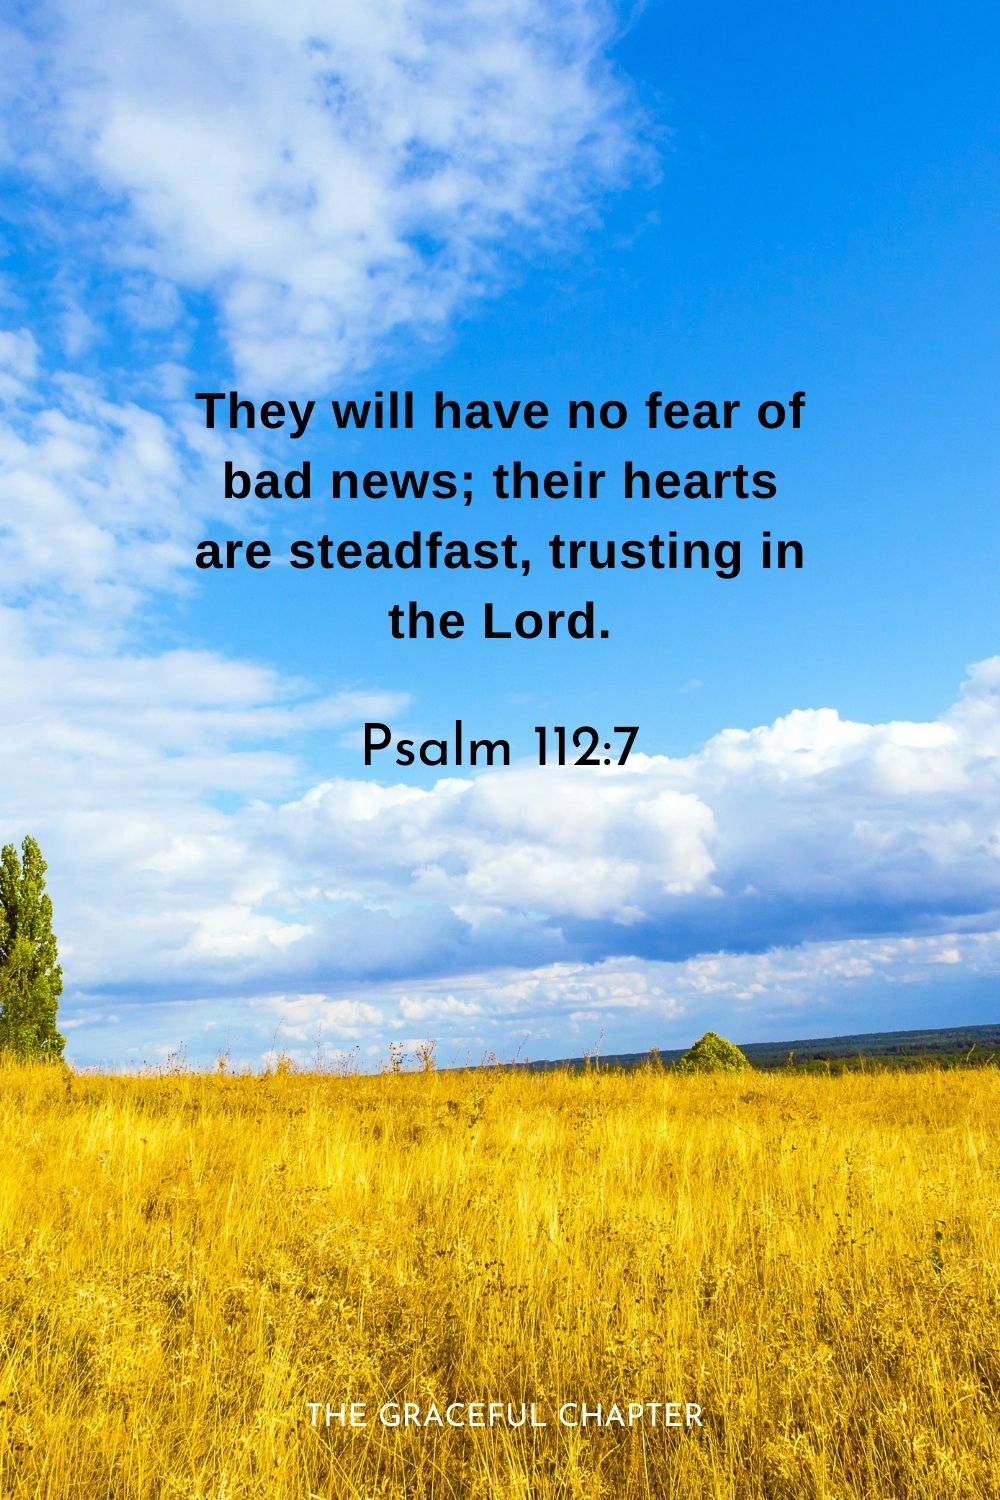 They will have no fear of bad news; their hearts are steadfast, trusting in the Lord.